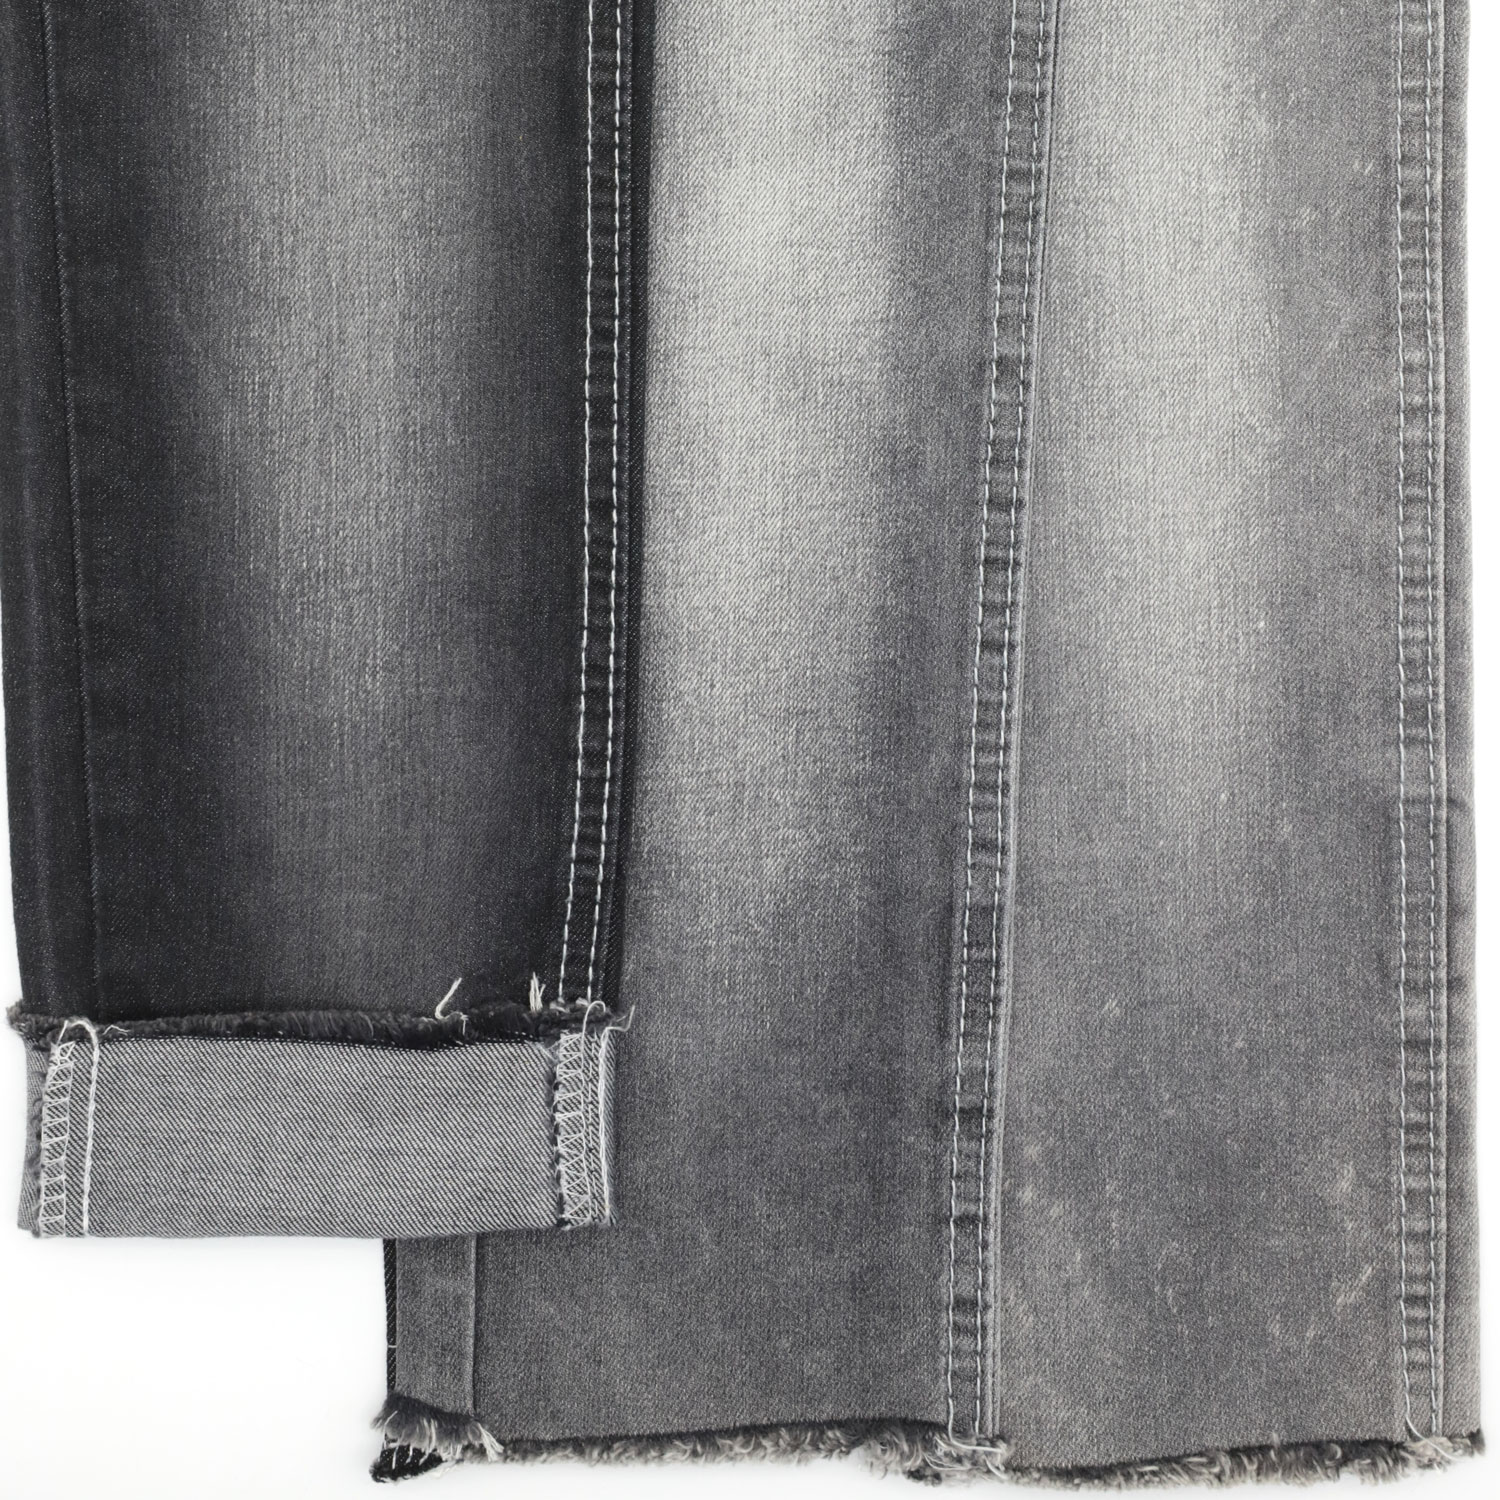 A Look Behind the Advantages of a Stretch Denim Material 2